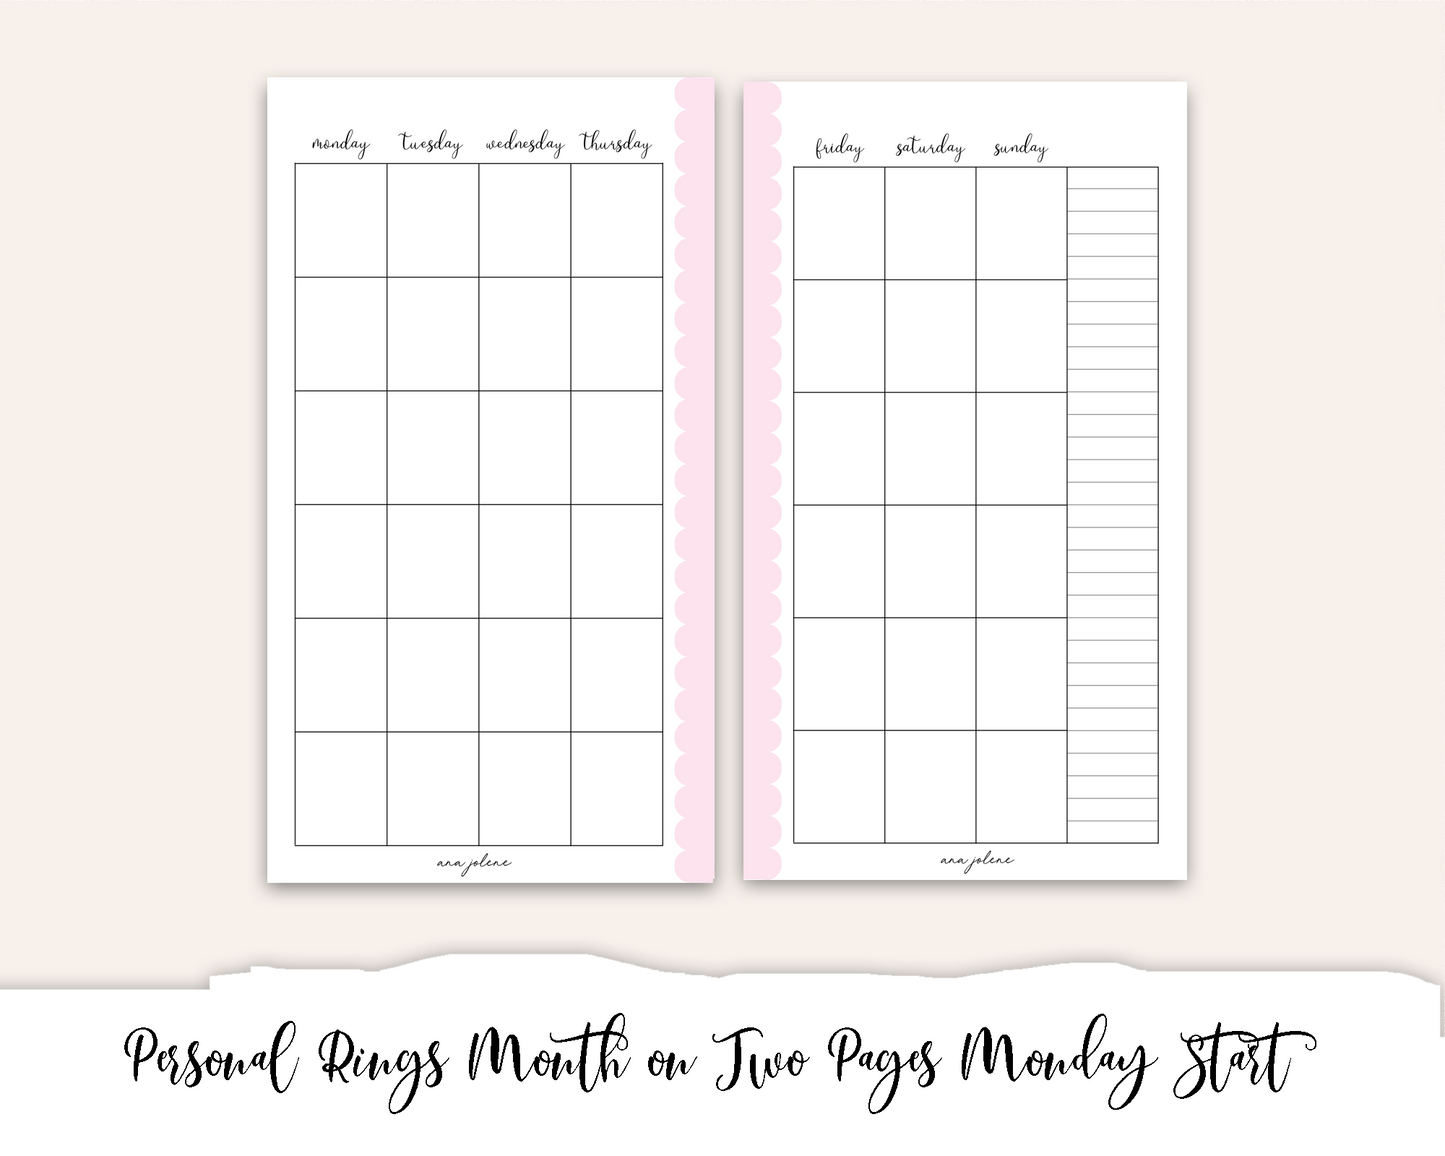 Personal Rings Month on Two Pages Printable